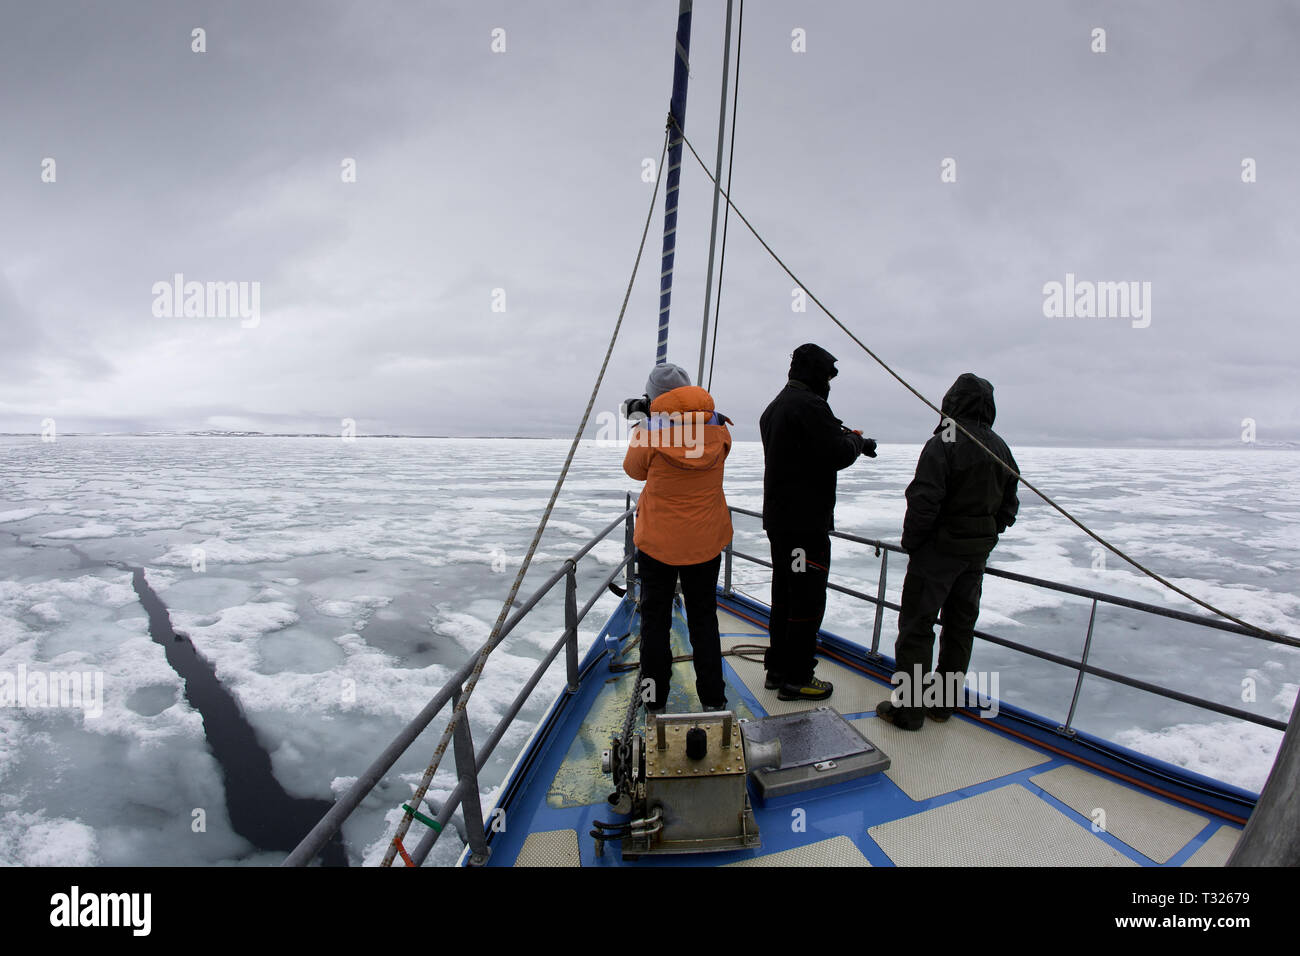 Tourists on Cruise Sail Boat, Spitsbergen, Arctic Ocean, Norway Stock Photo